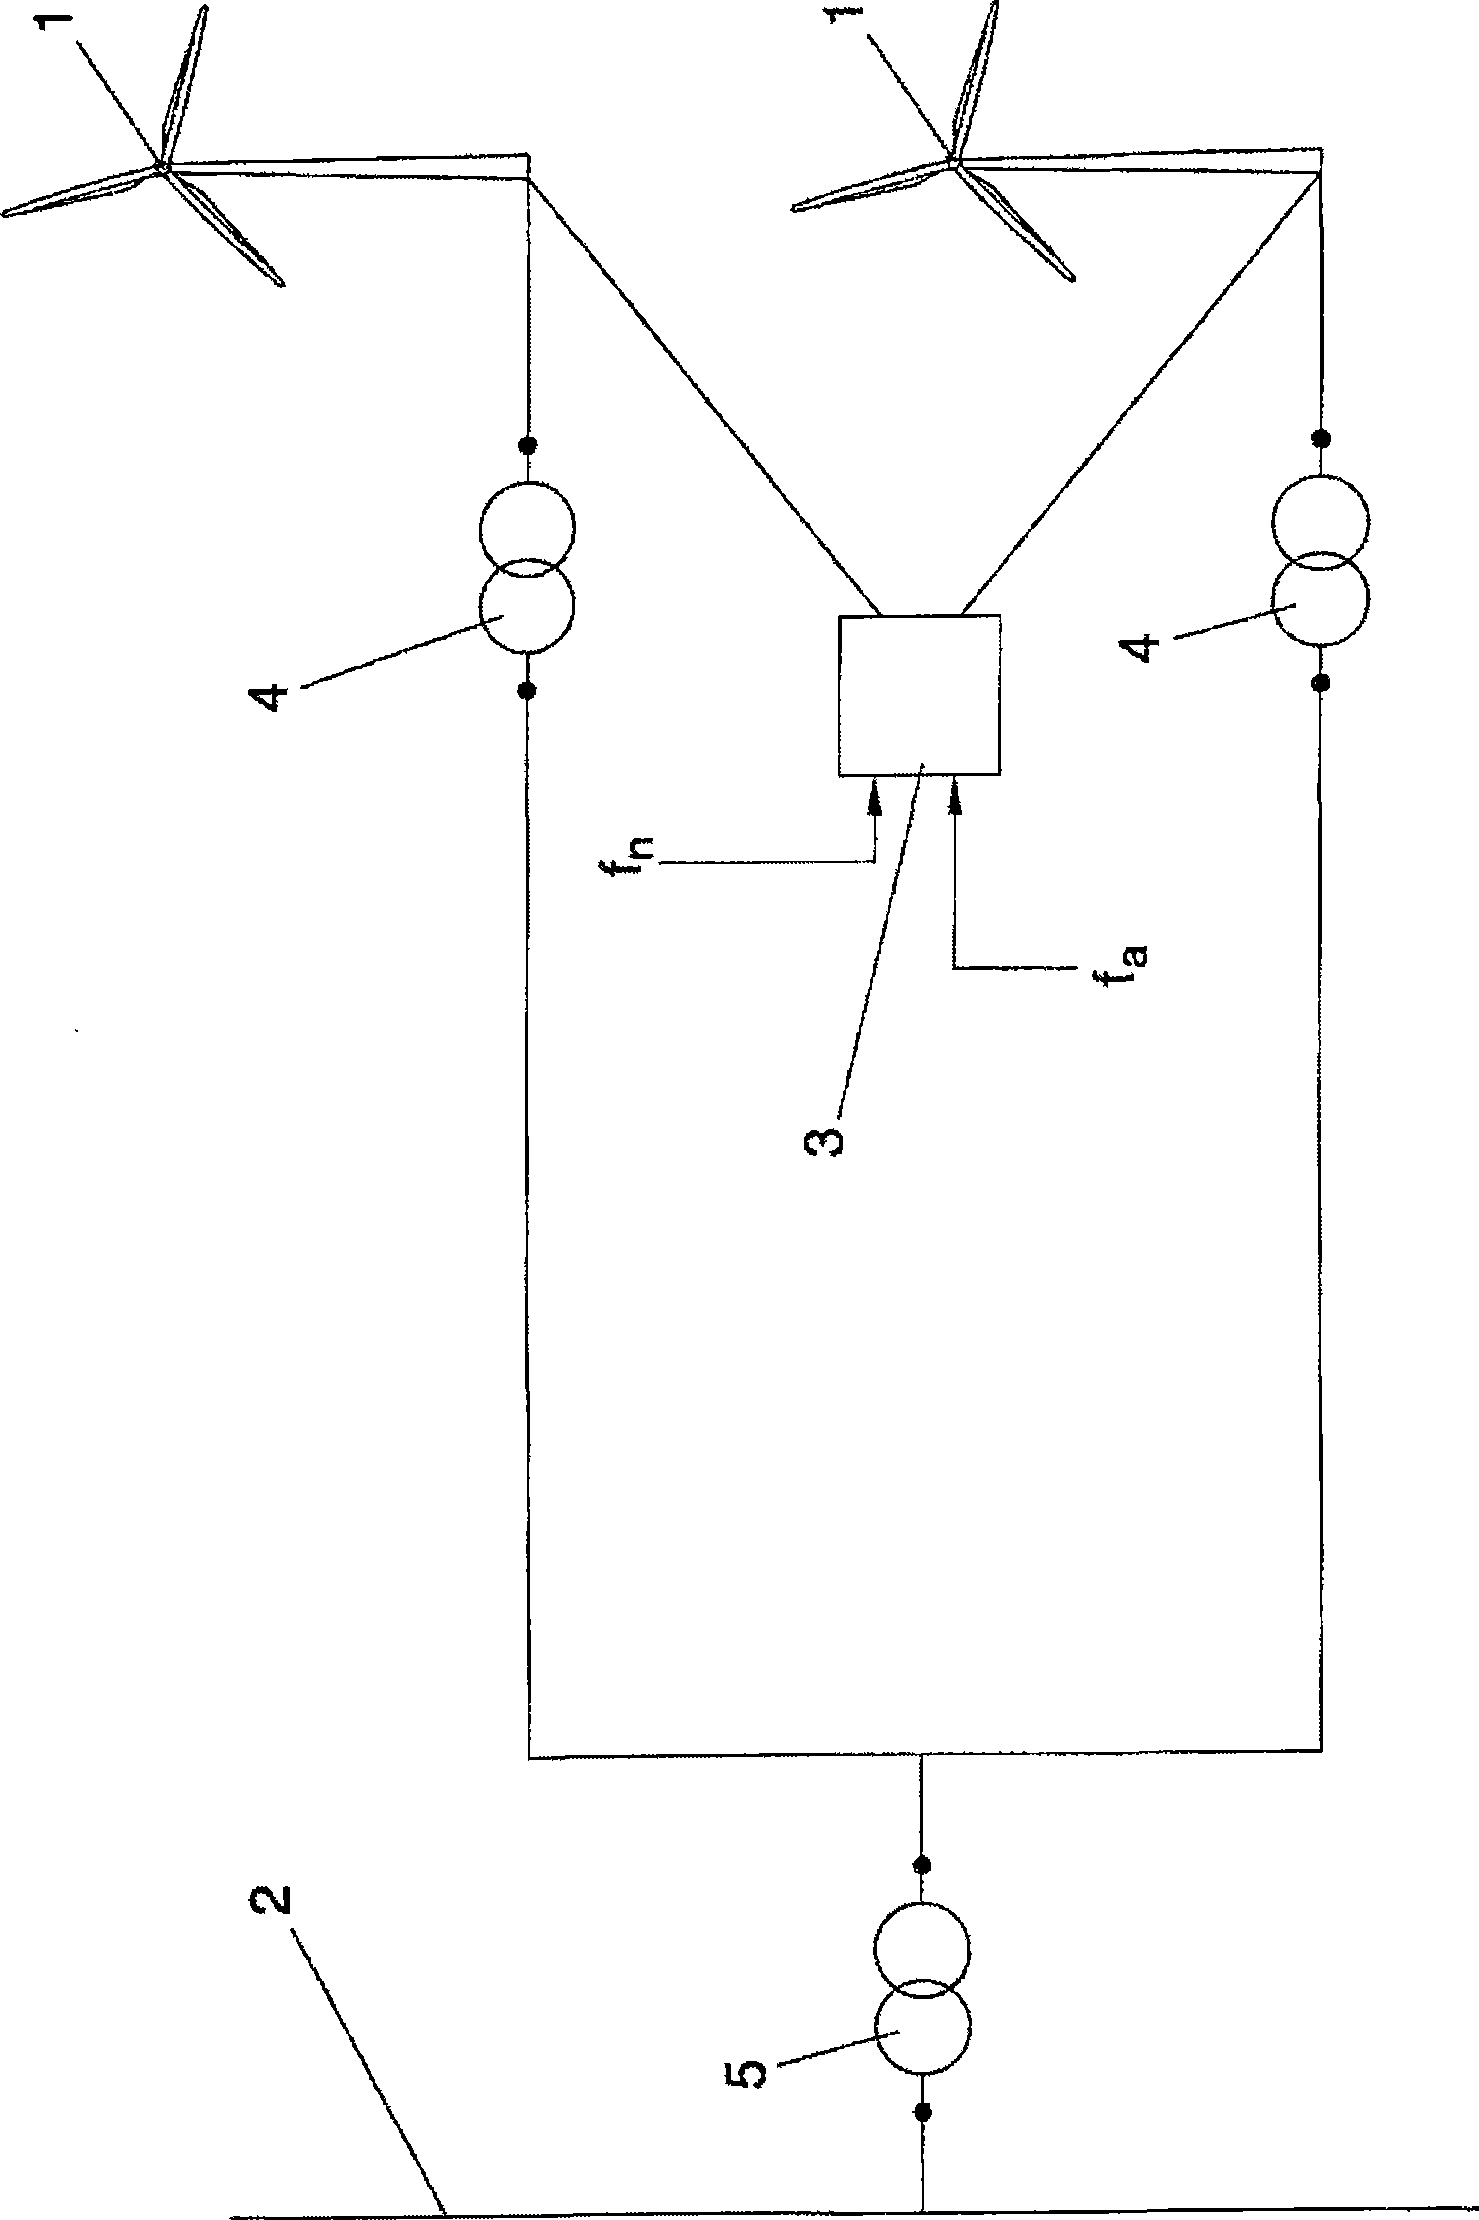 Wind power installation and method of operating it